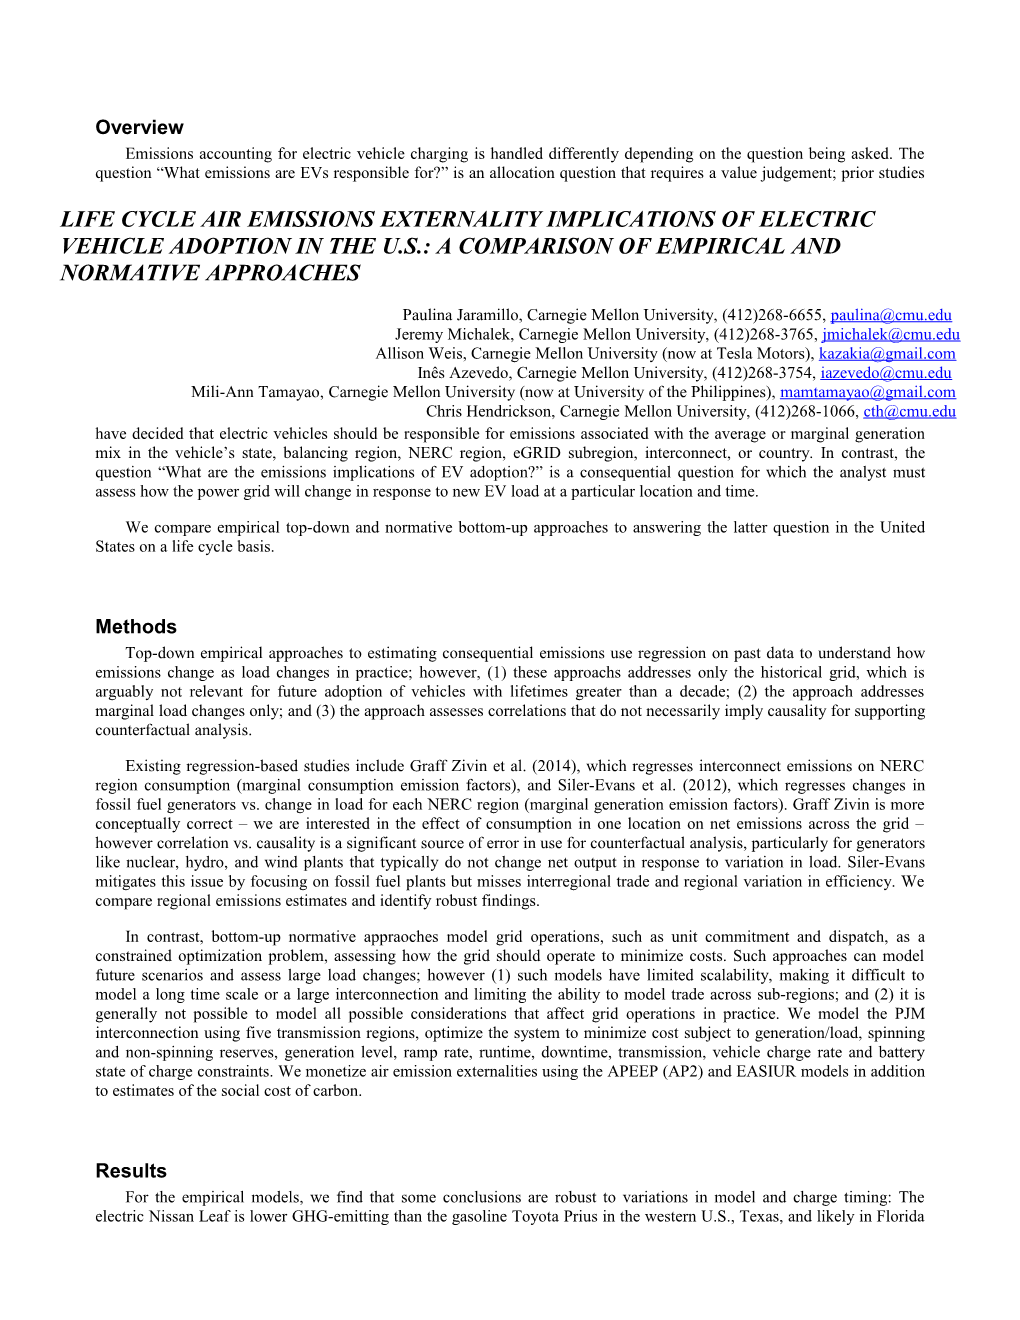 Life Cycle Air Emissions Externality Implications of Electric Vehicle Adoption in The